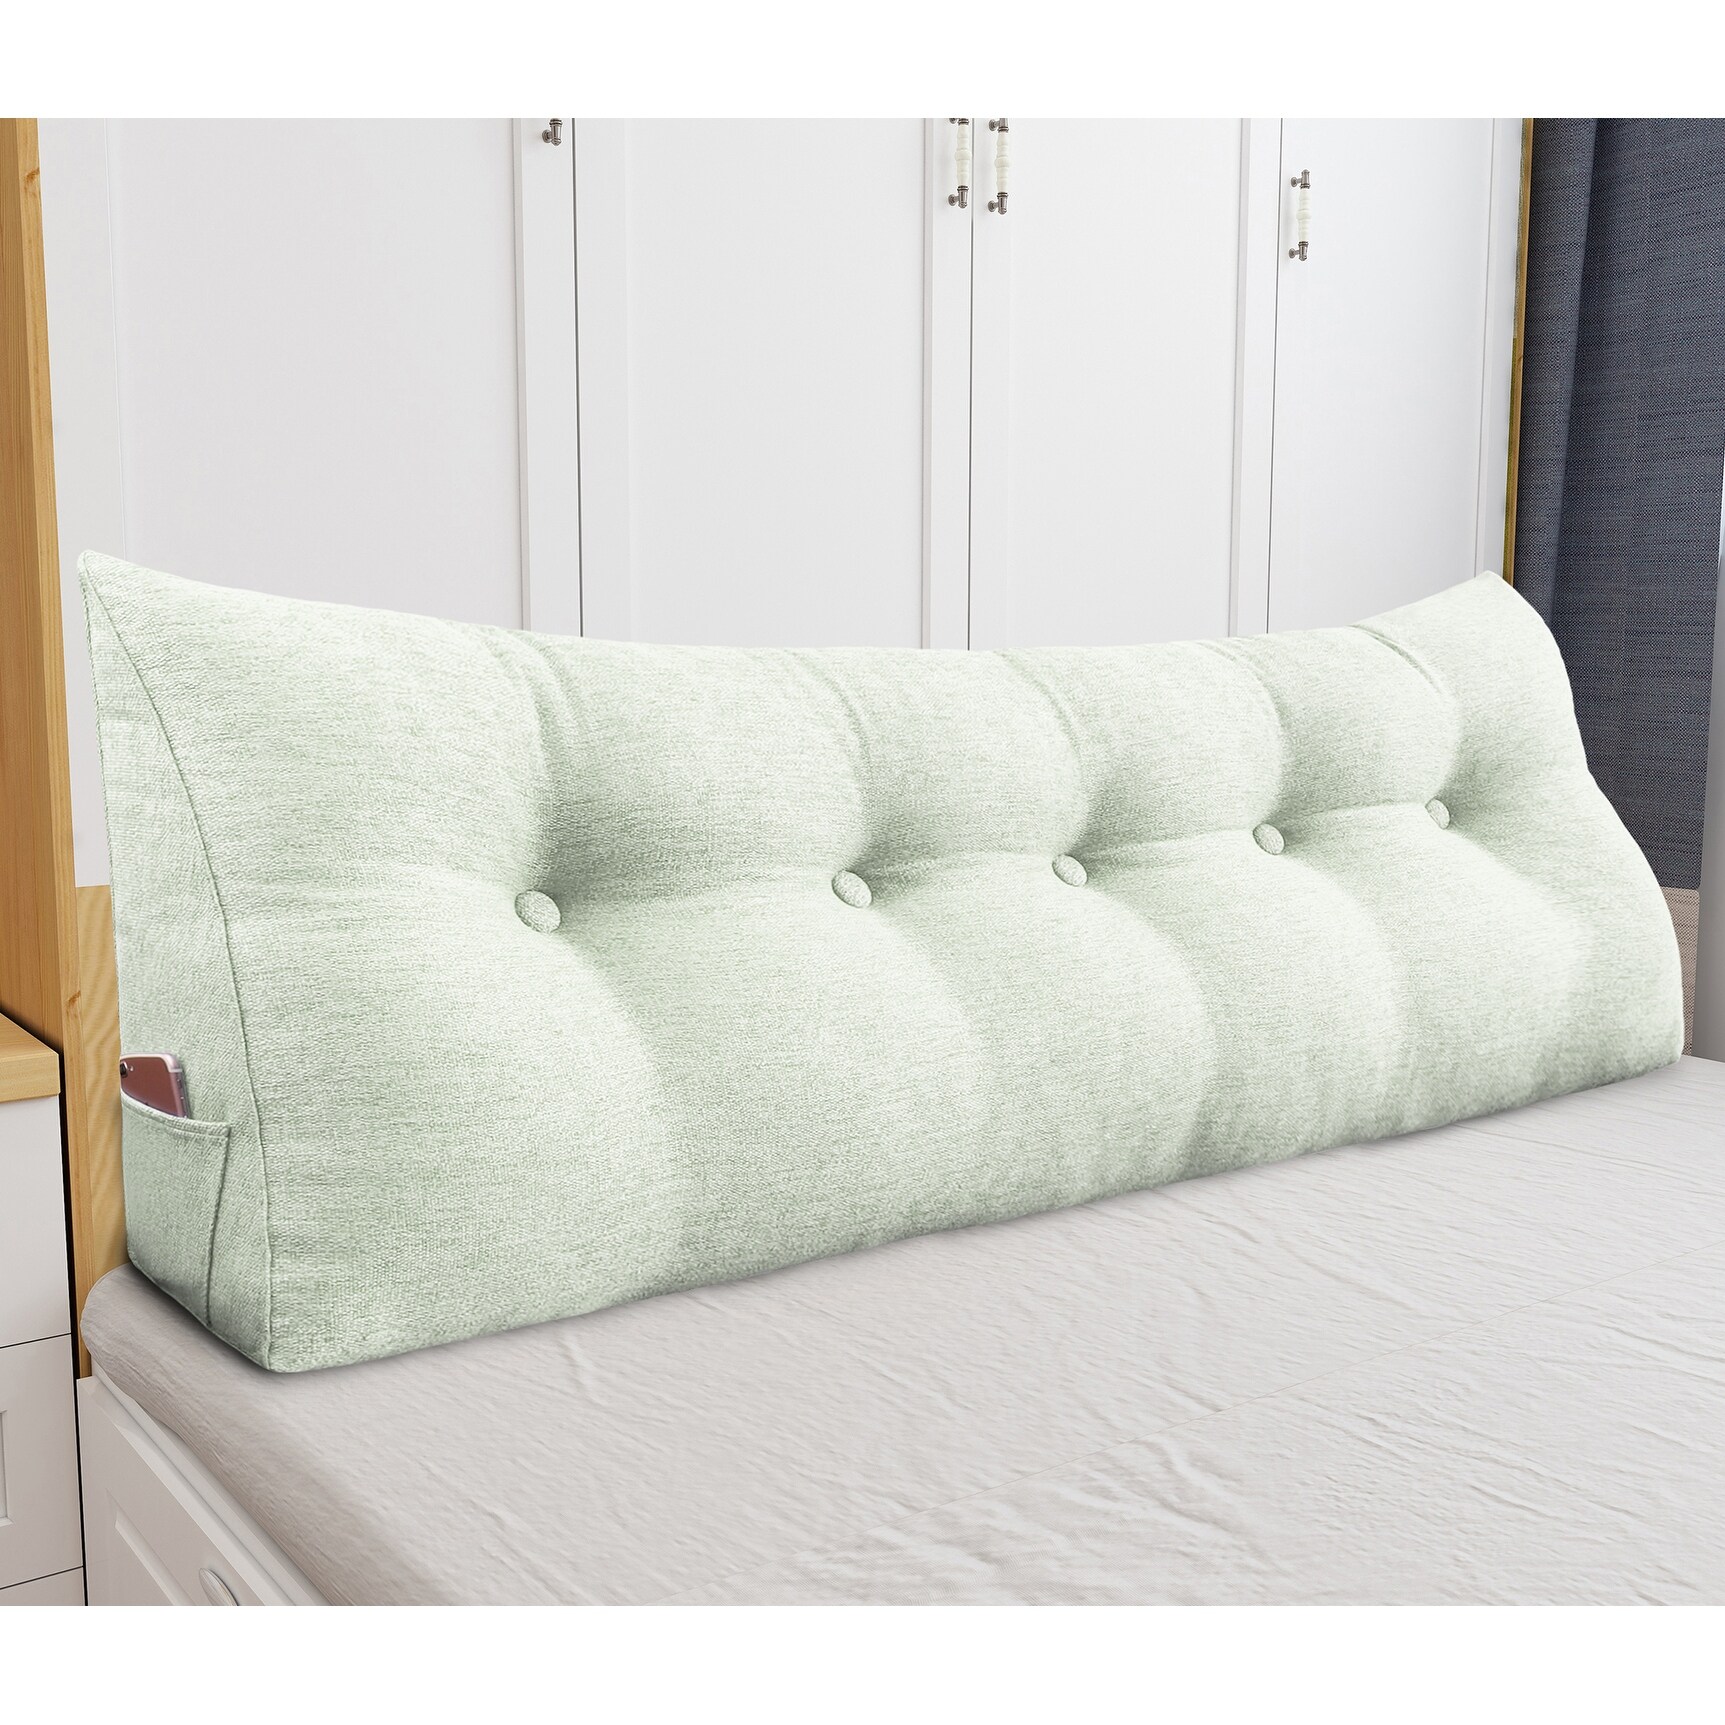 https://ak1.ostkcdn.com/images/products/is/images/direct/dd2d67e8f0388973fcbcb31cbcd858117488c3f1/WOWMAX-Bed-Wedge-Pillow-Bolster-Large-Backrest-Support-Off-White-Full-Size.jpg